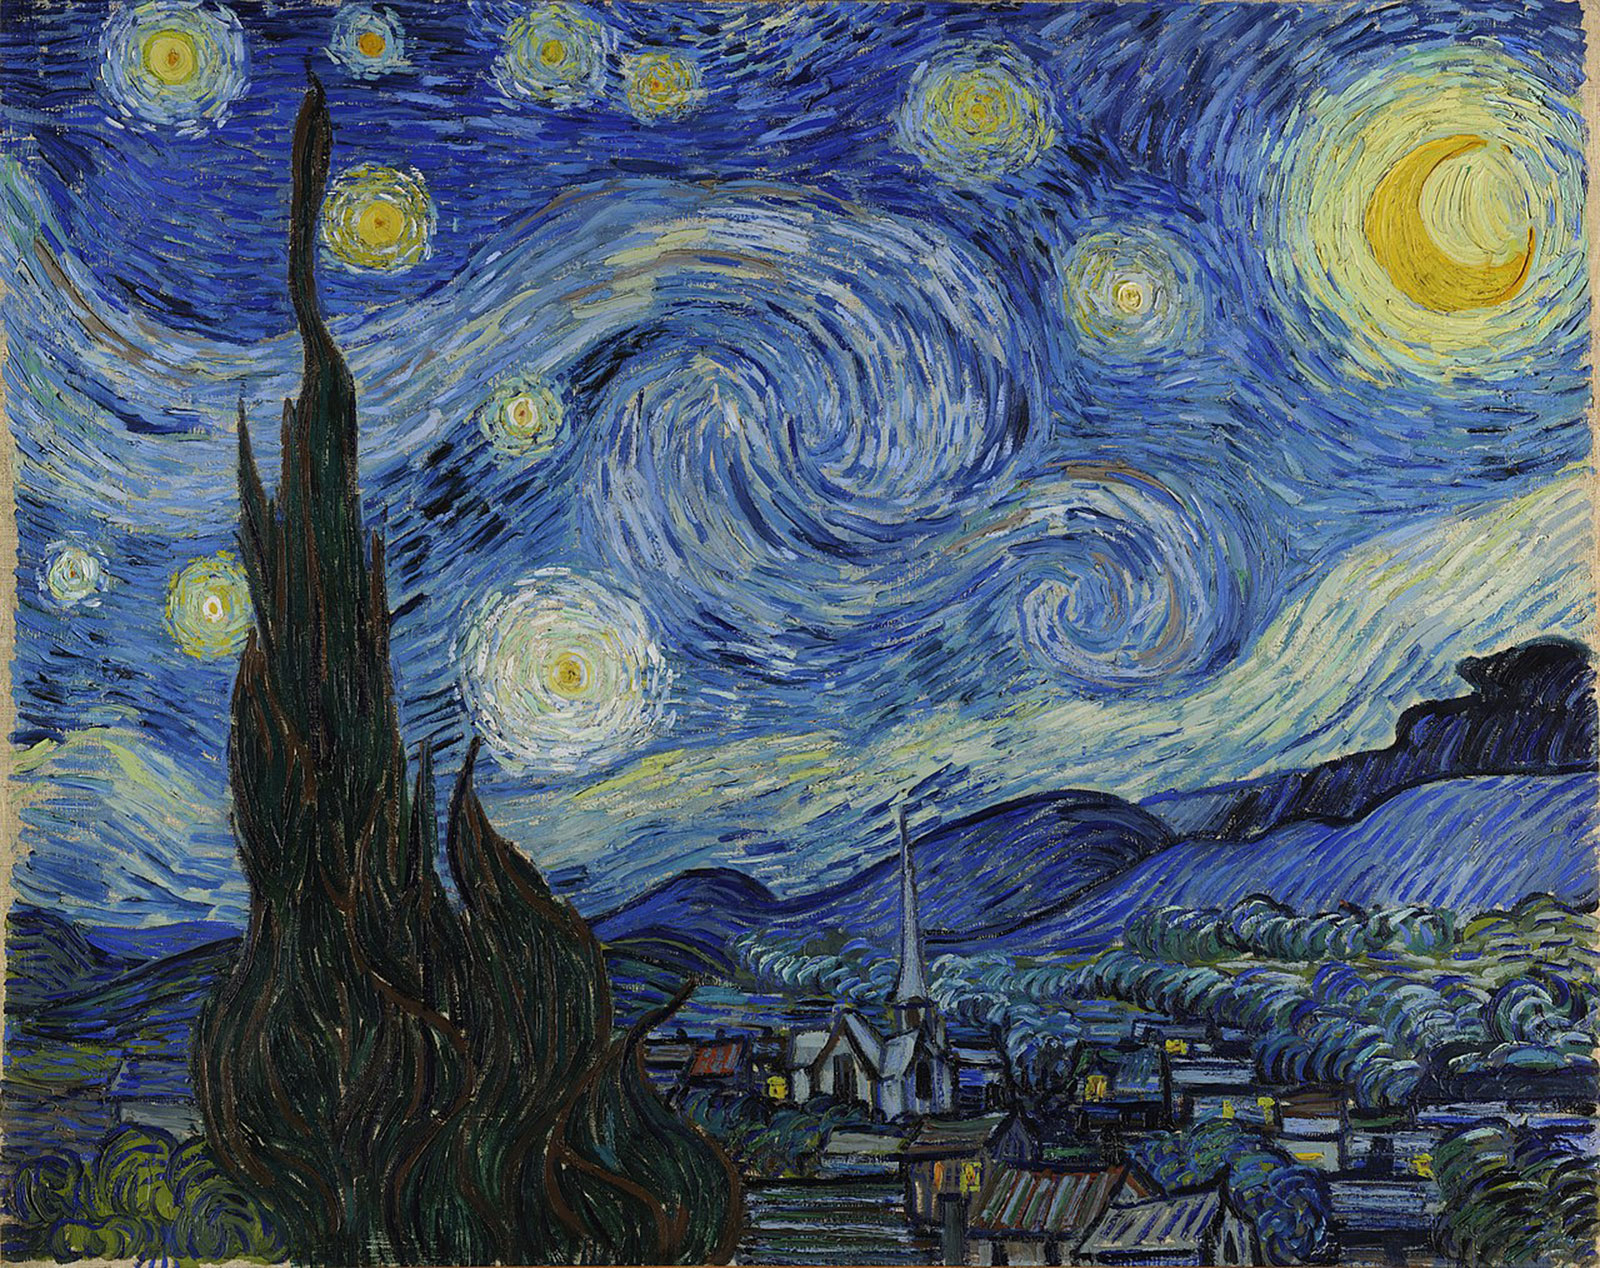 Can You Match These Famous Paintings to Their Legendary Creators? The Starry Night Painting By Vincent Van Gogh